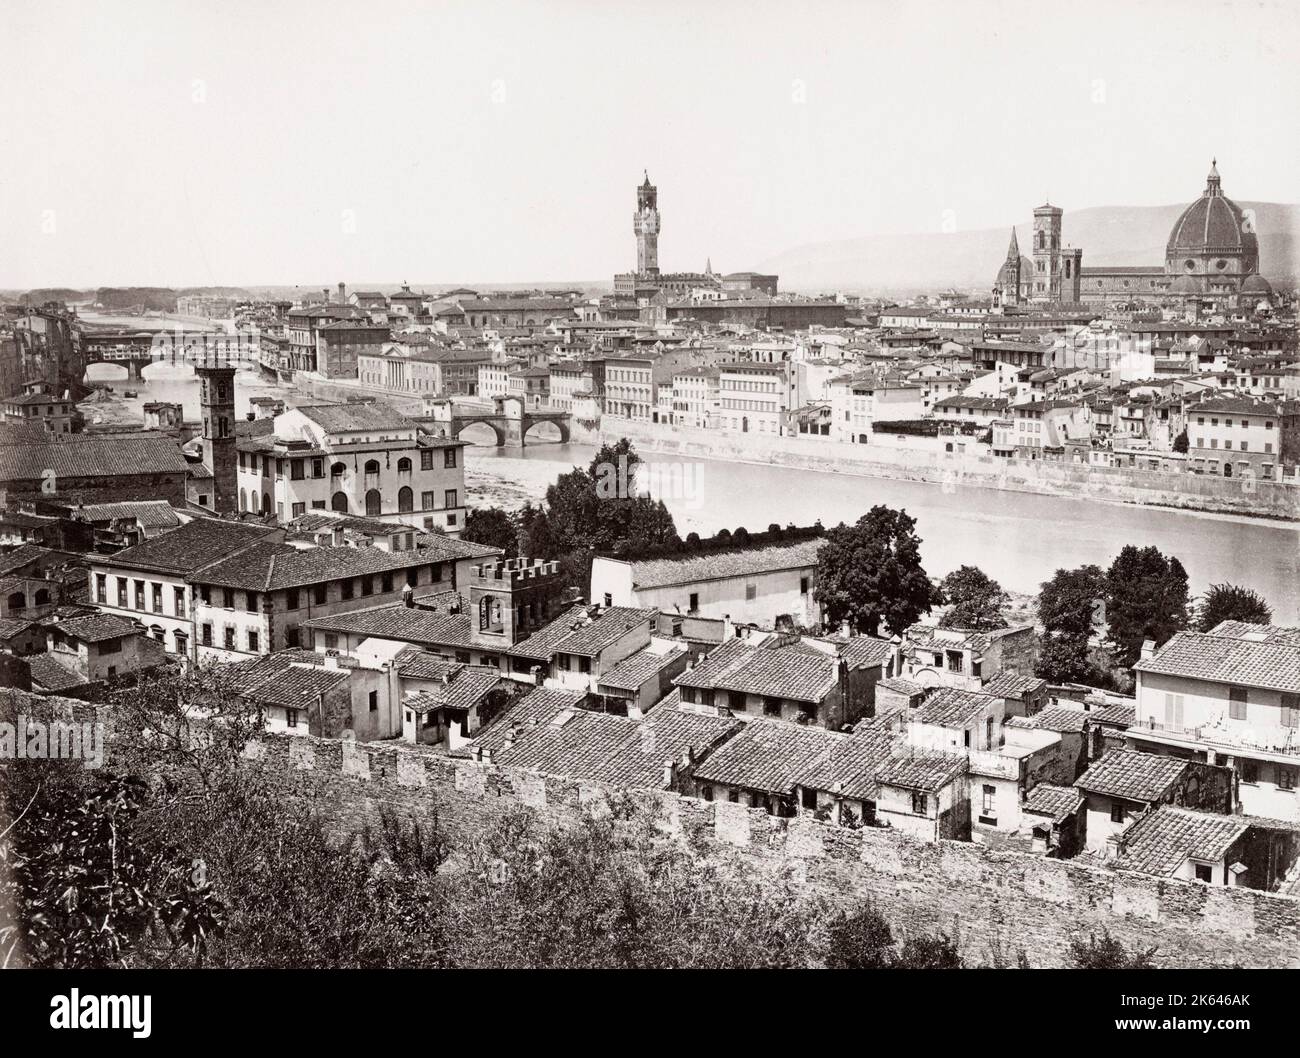 19th century vintage photograph: view of Florence, Firenze, across the River Arno, Italy. Stock Photo